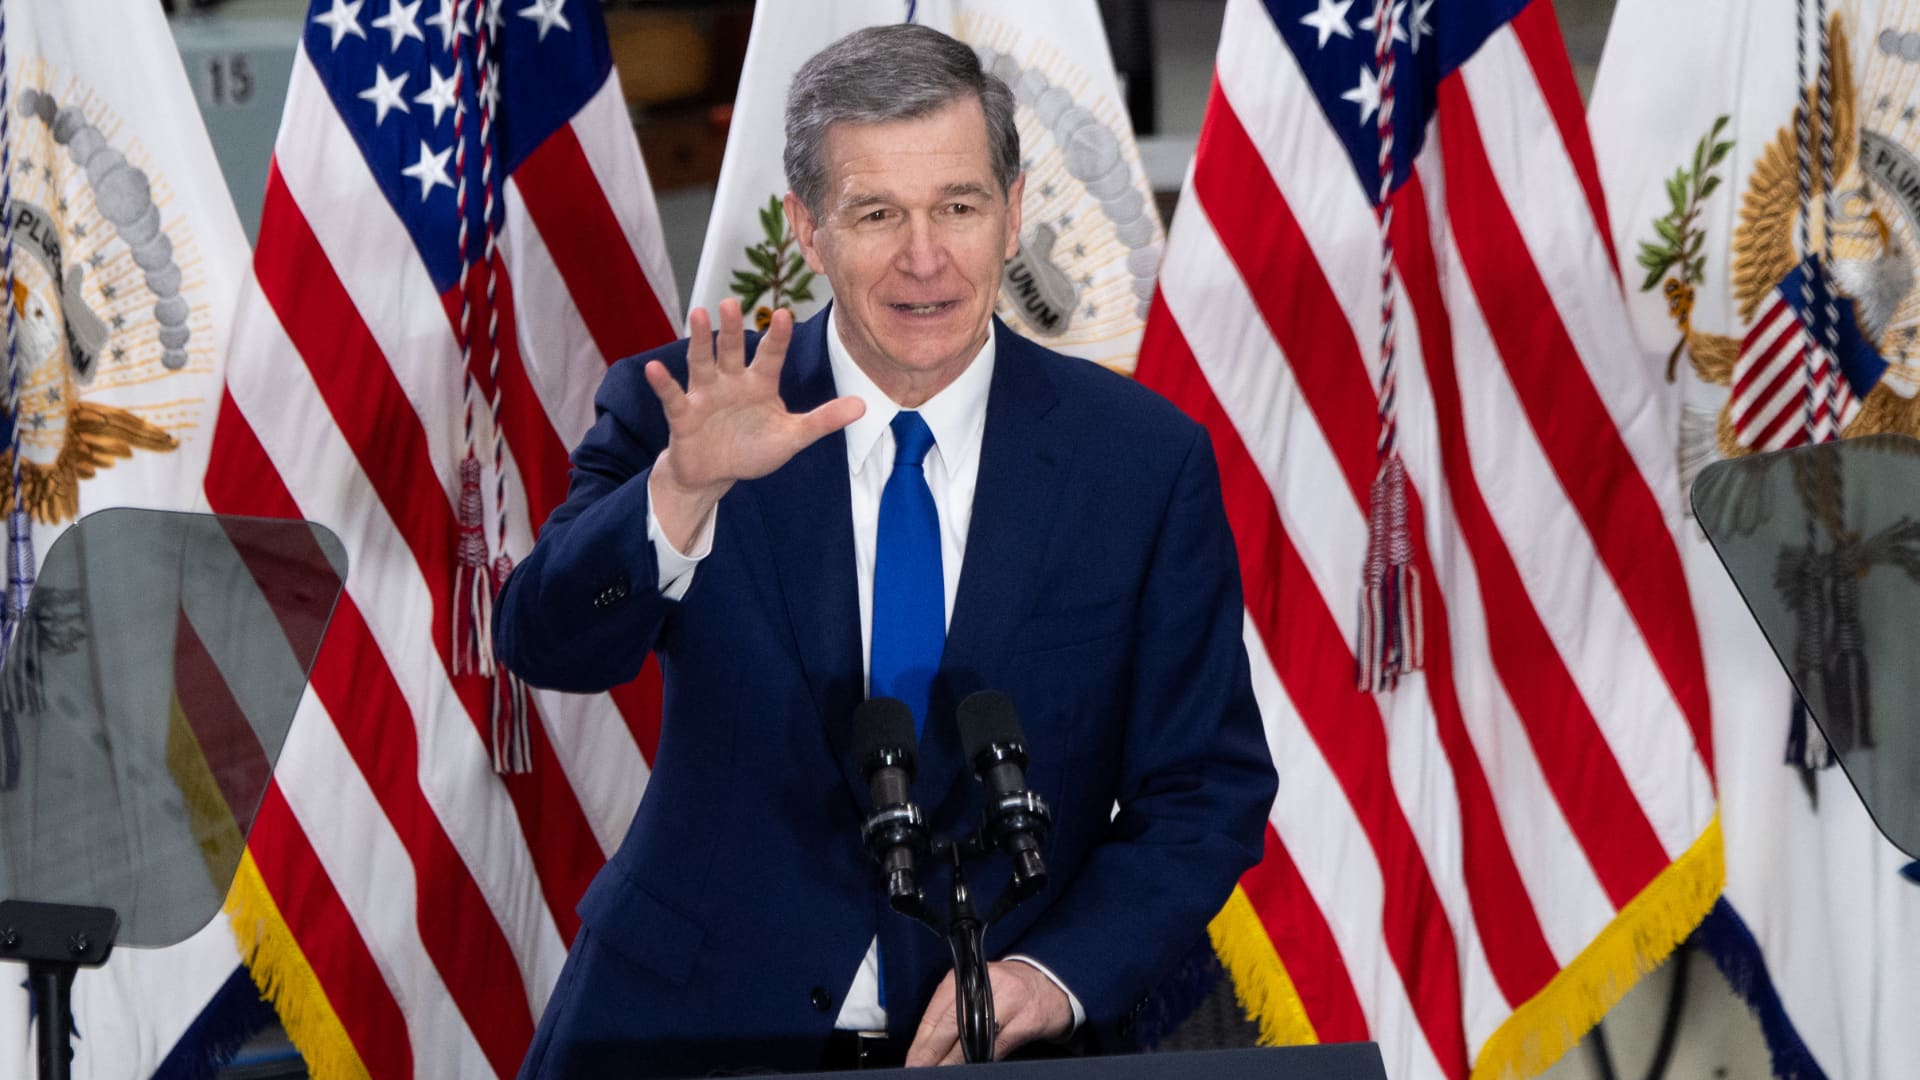 North Carolina Gov. Roy Cooper speaks during a visit by U.S. Vice President Kamala Harris to Guilford Technical Community College in Greensboro, North Carolina, on April 19, 2021.